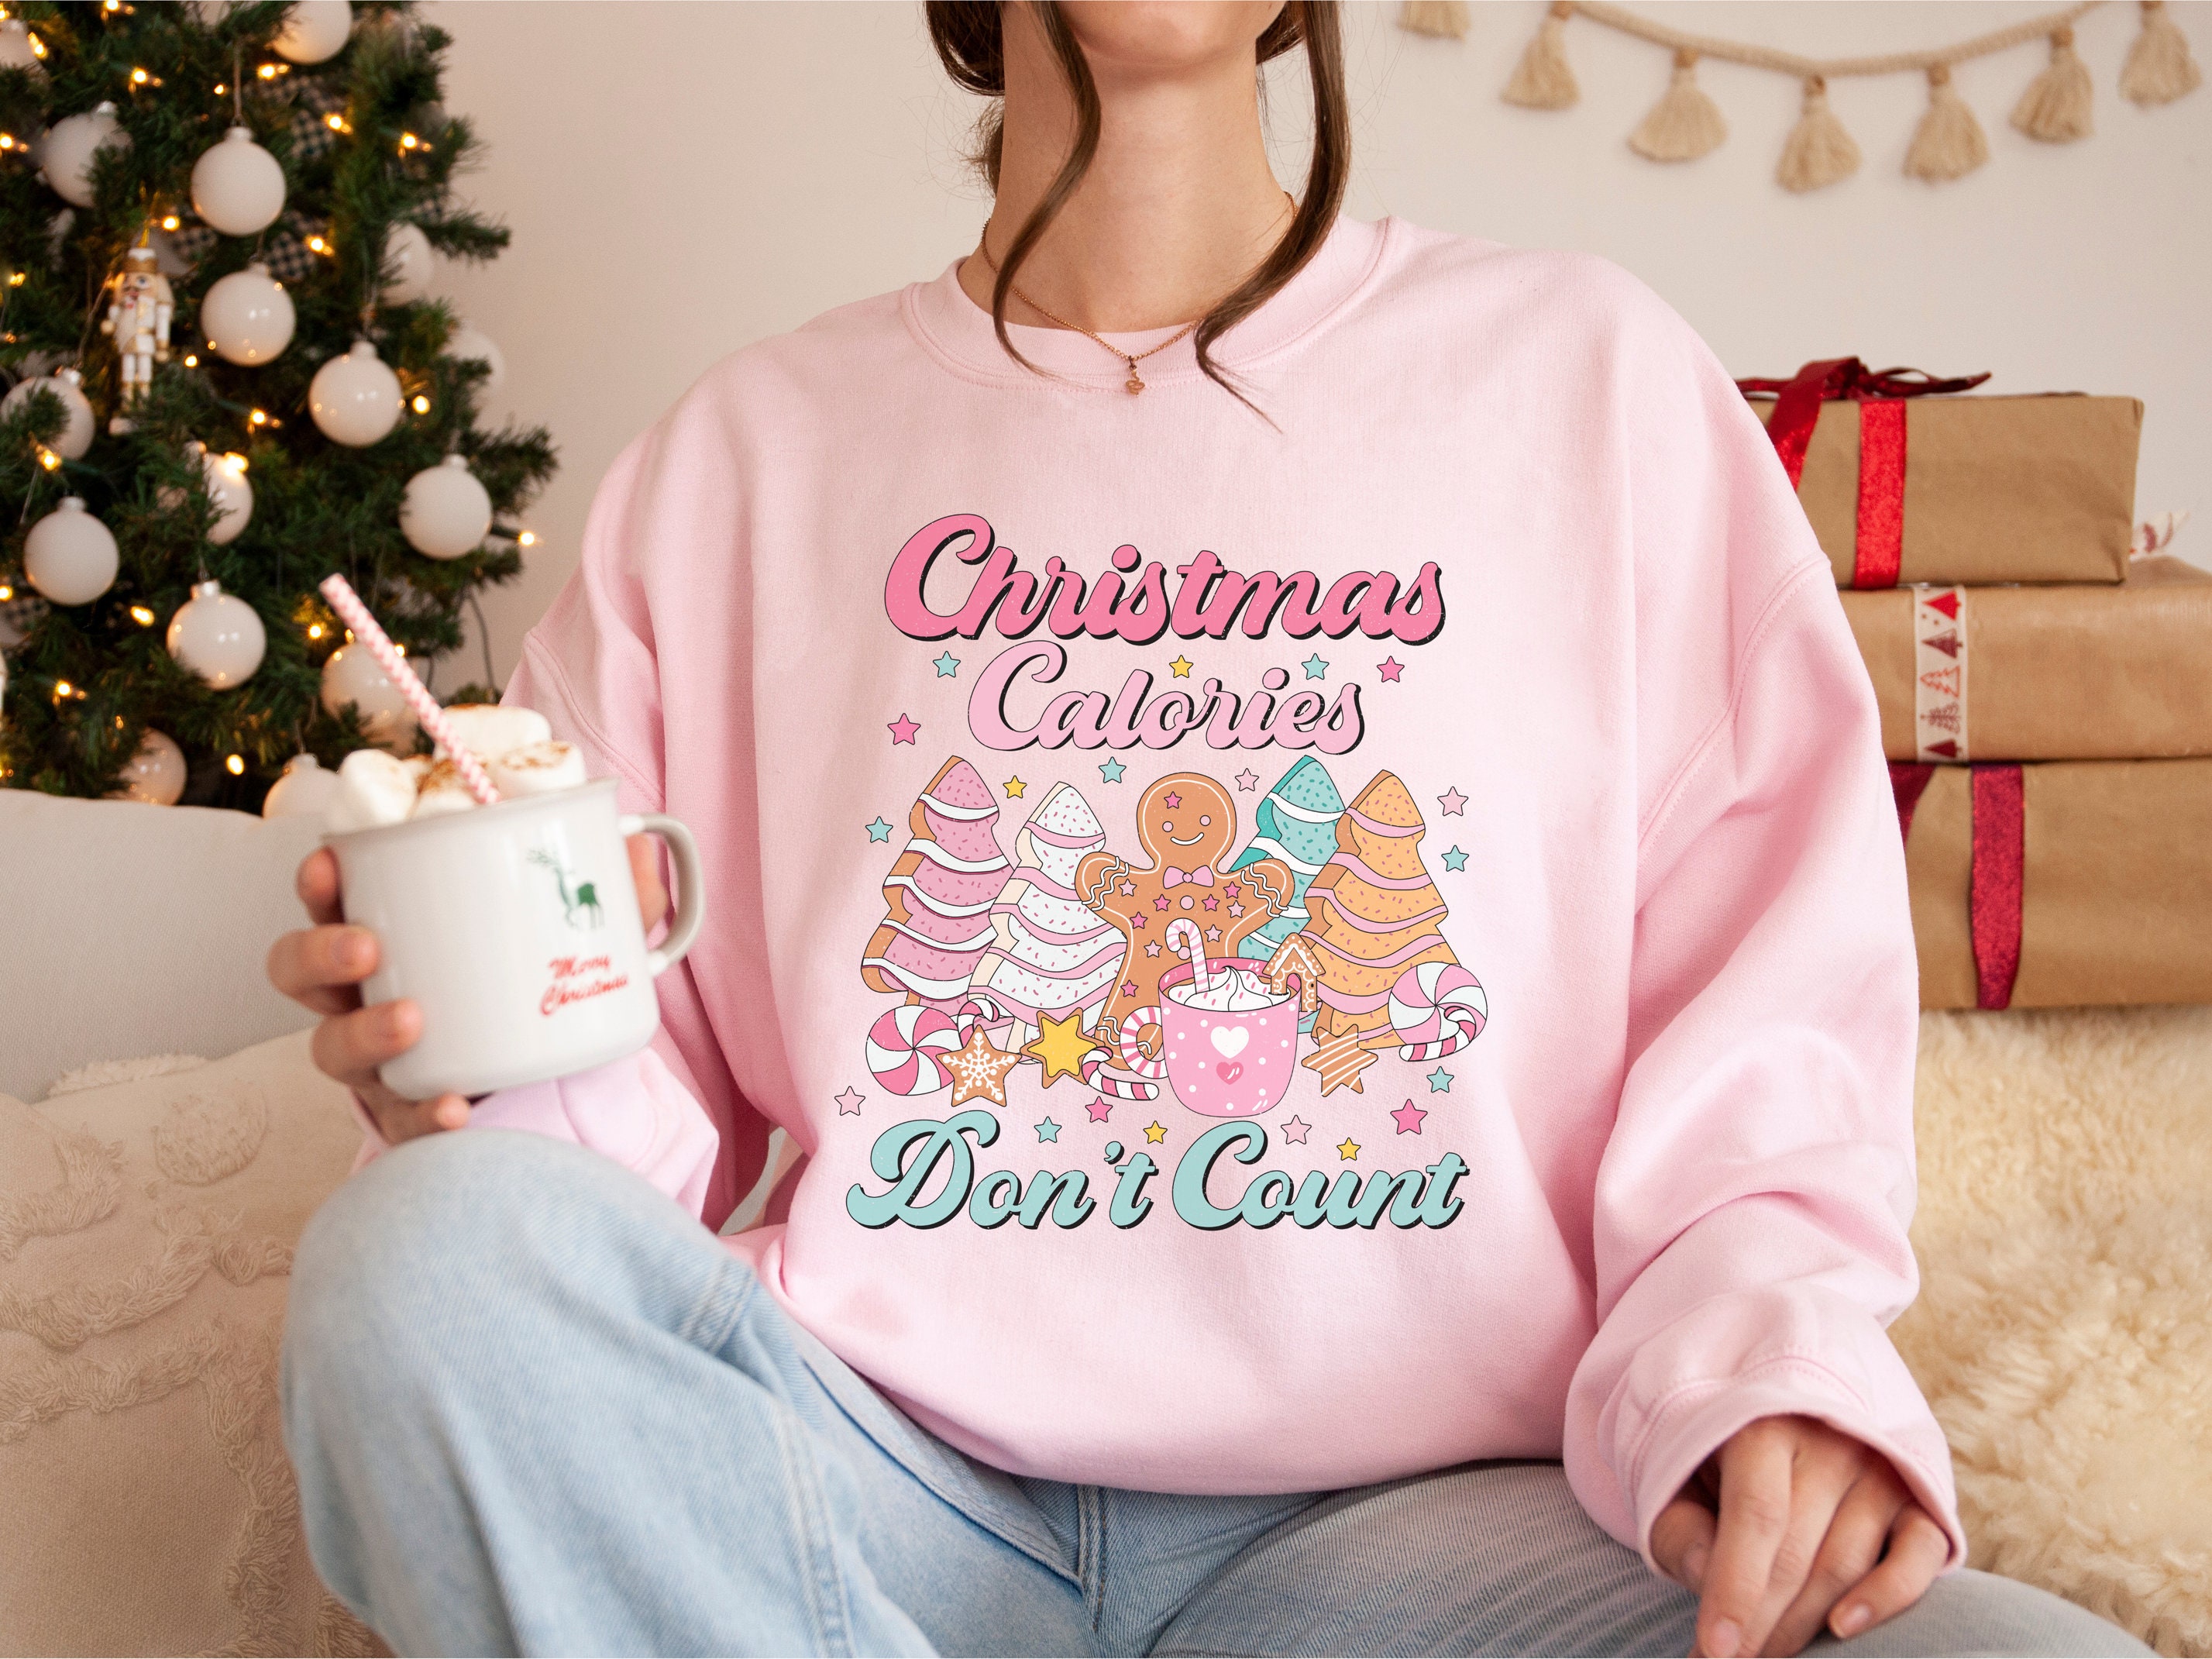 deals of the day lightning deals clearance Christmas Shirts for Women  Novelty Funny Graphic Lightweight Sweatshirt Xmas Tree Holiday Cute Tee  Pink